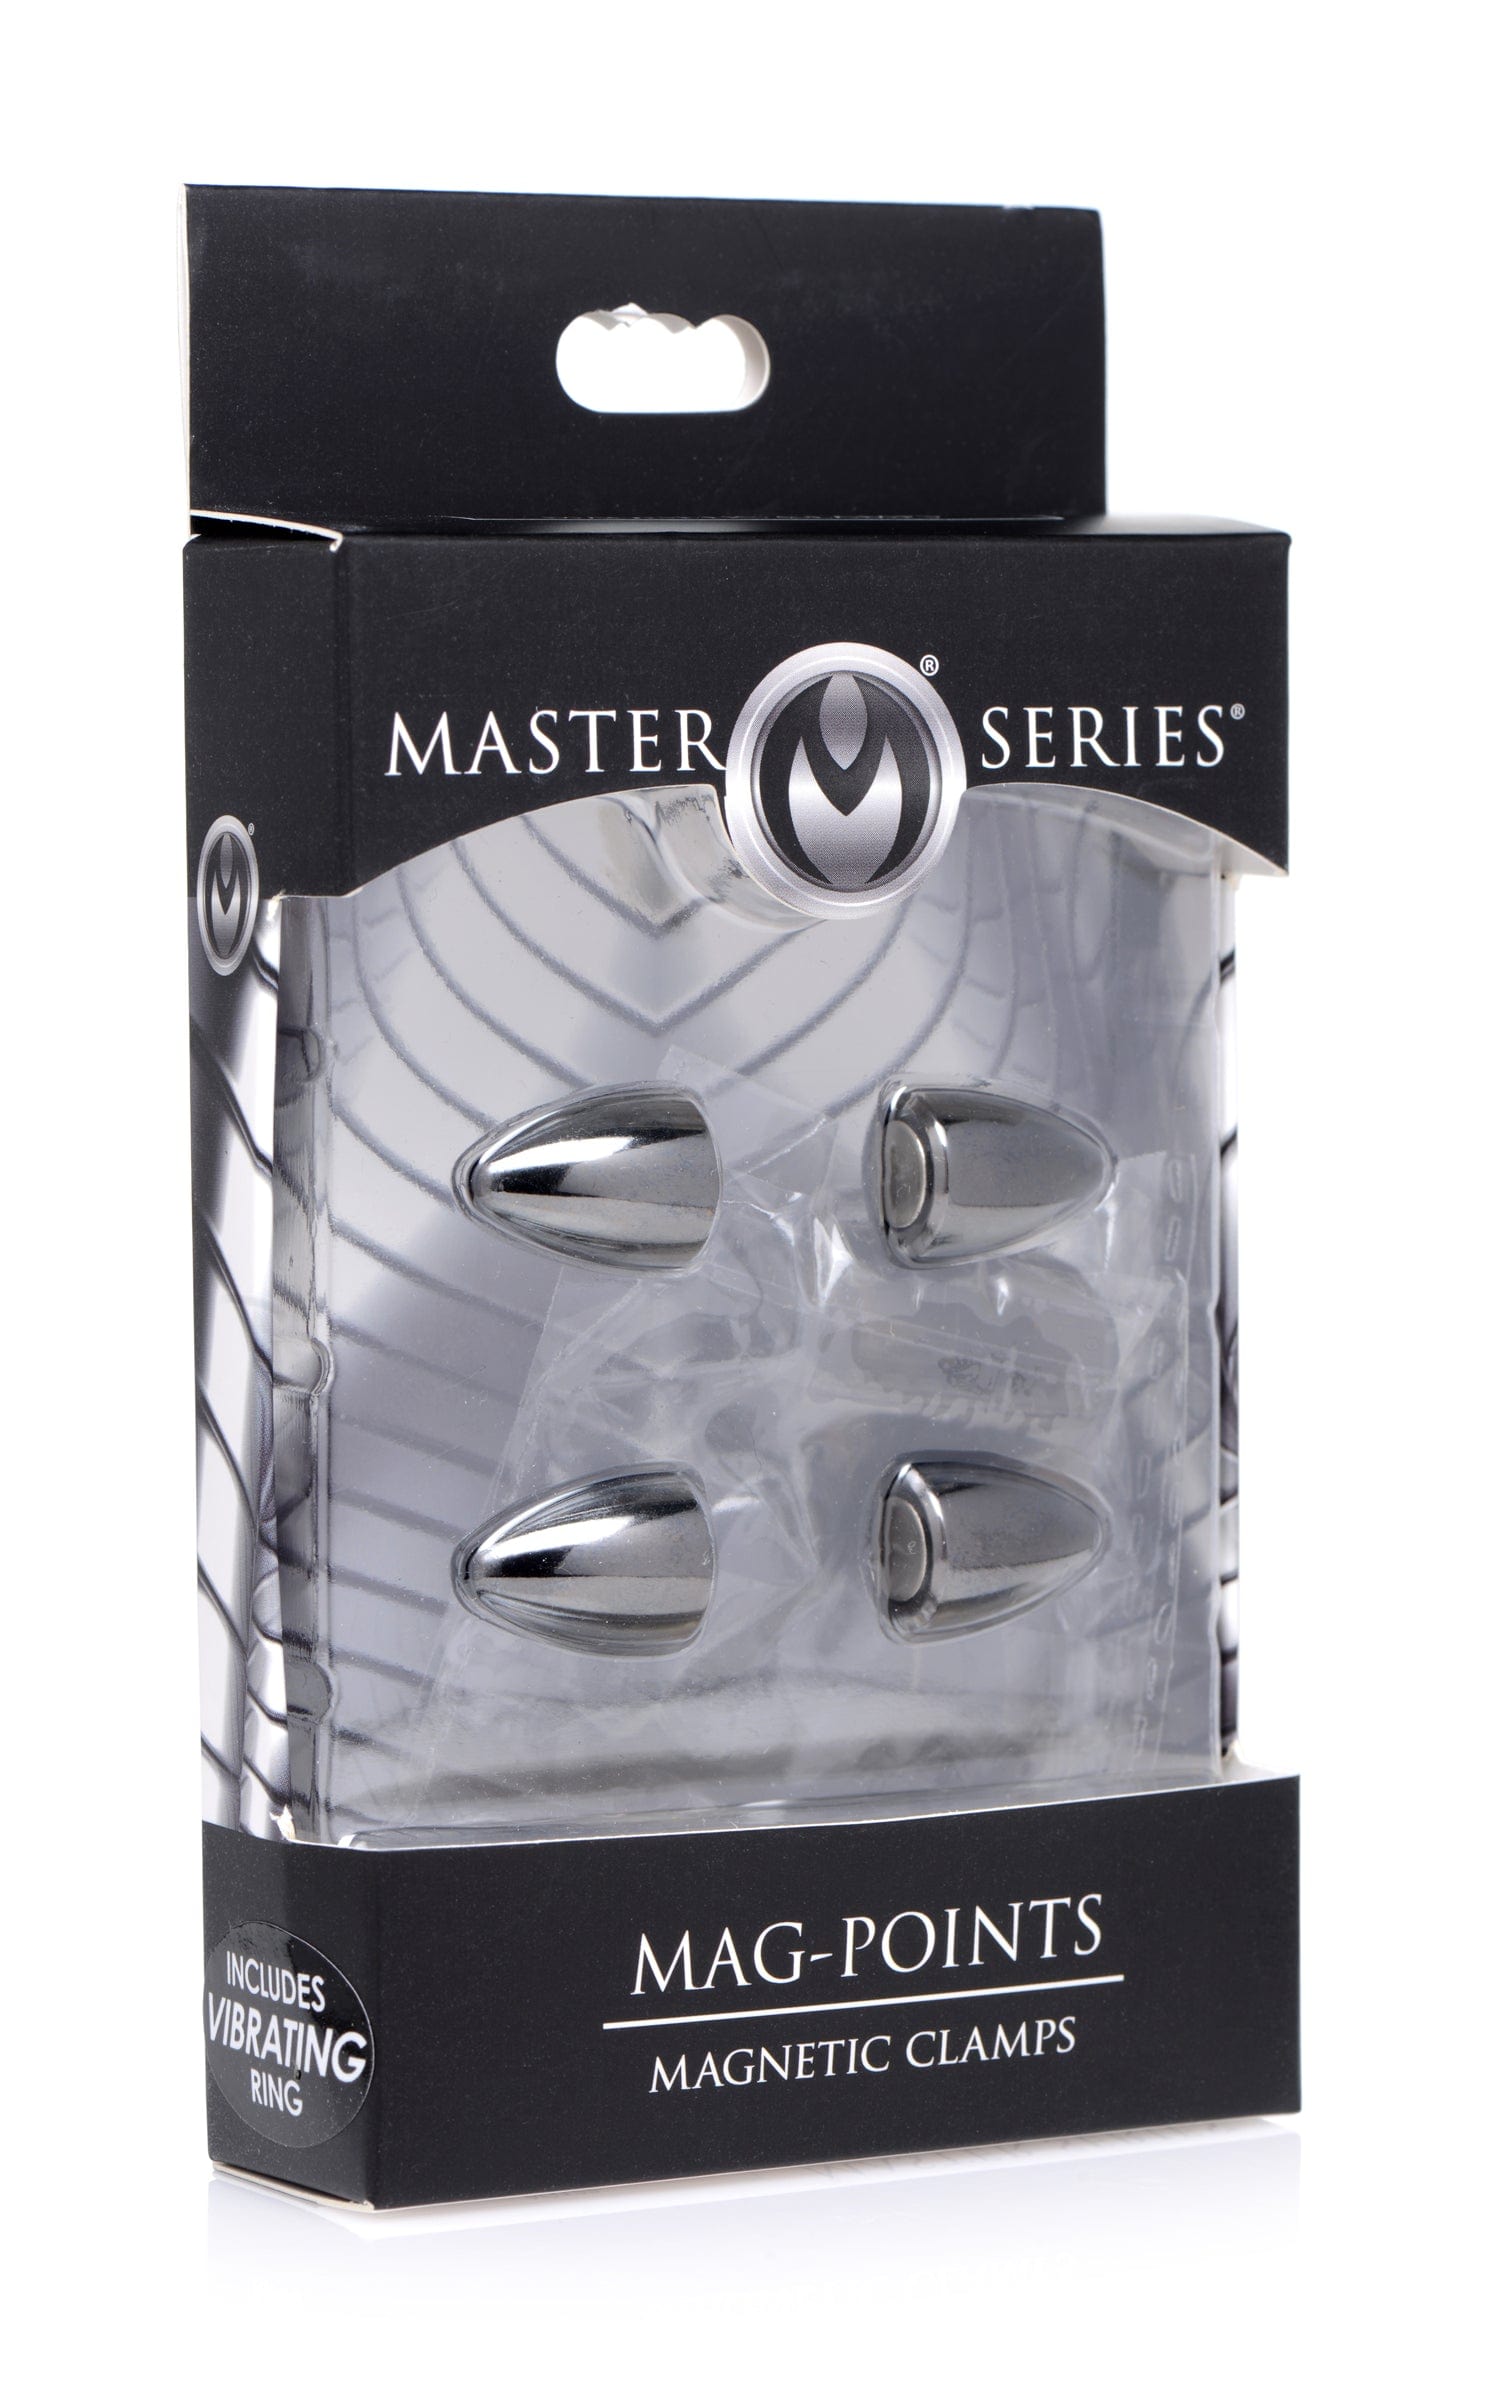 Master Series Nipple Clamp Mag-points Magnetic Clamps at the Haus of Shag